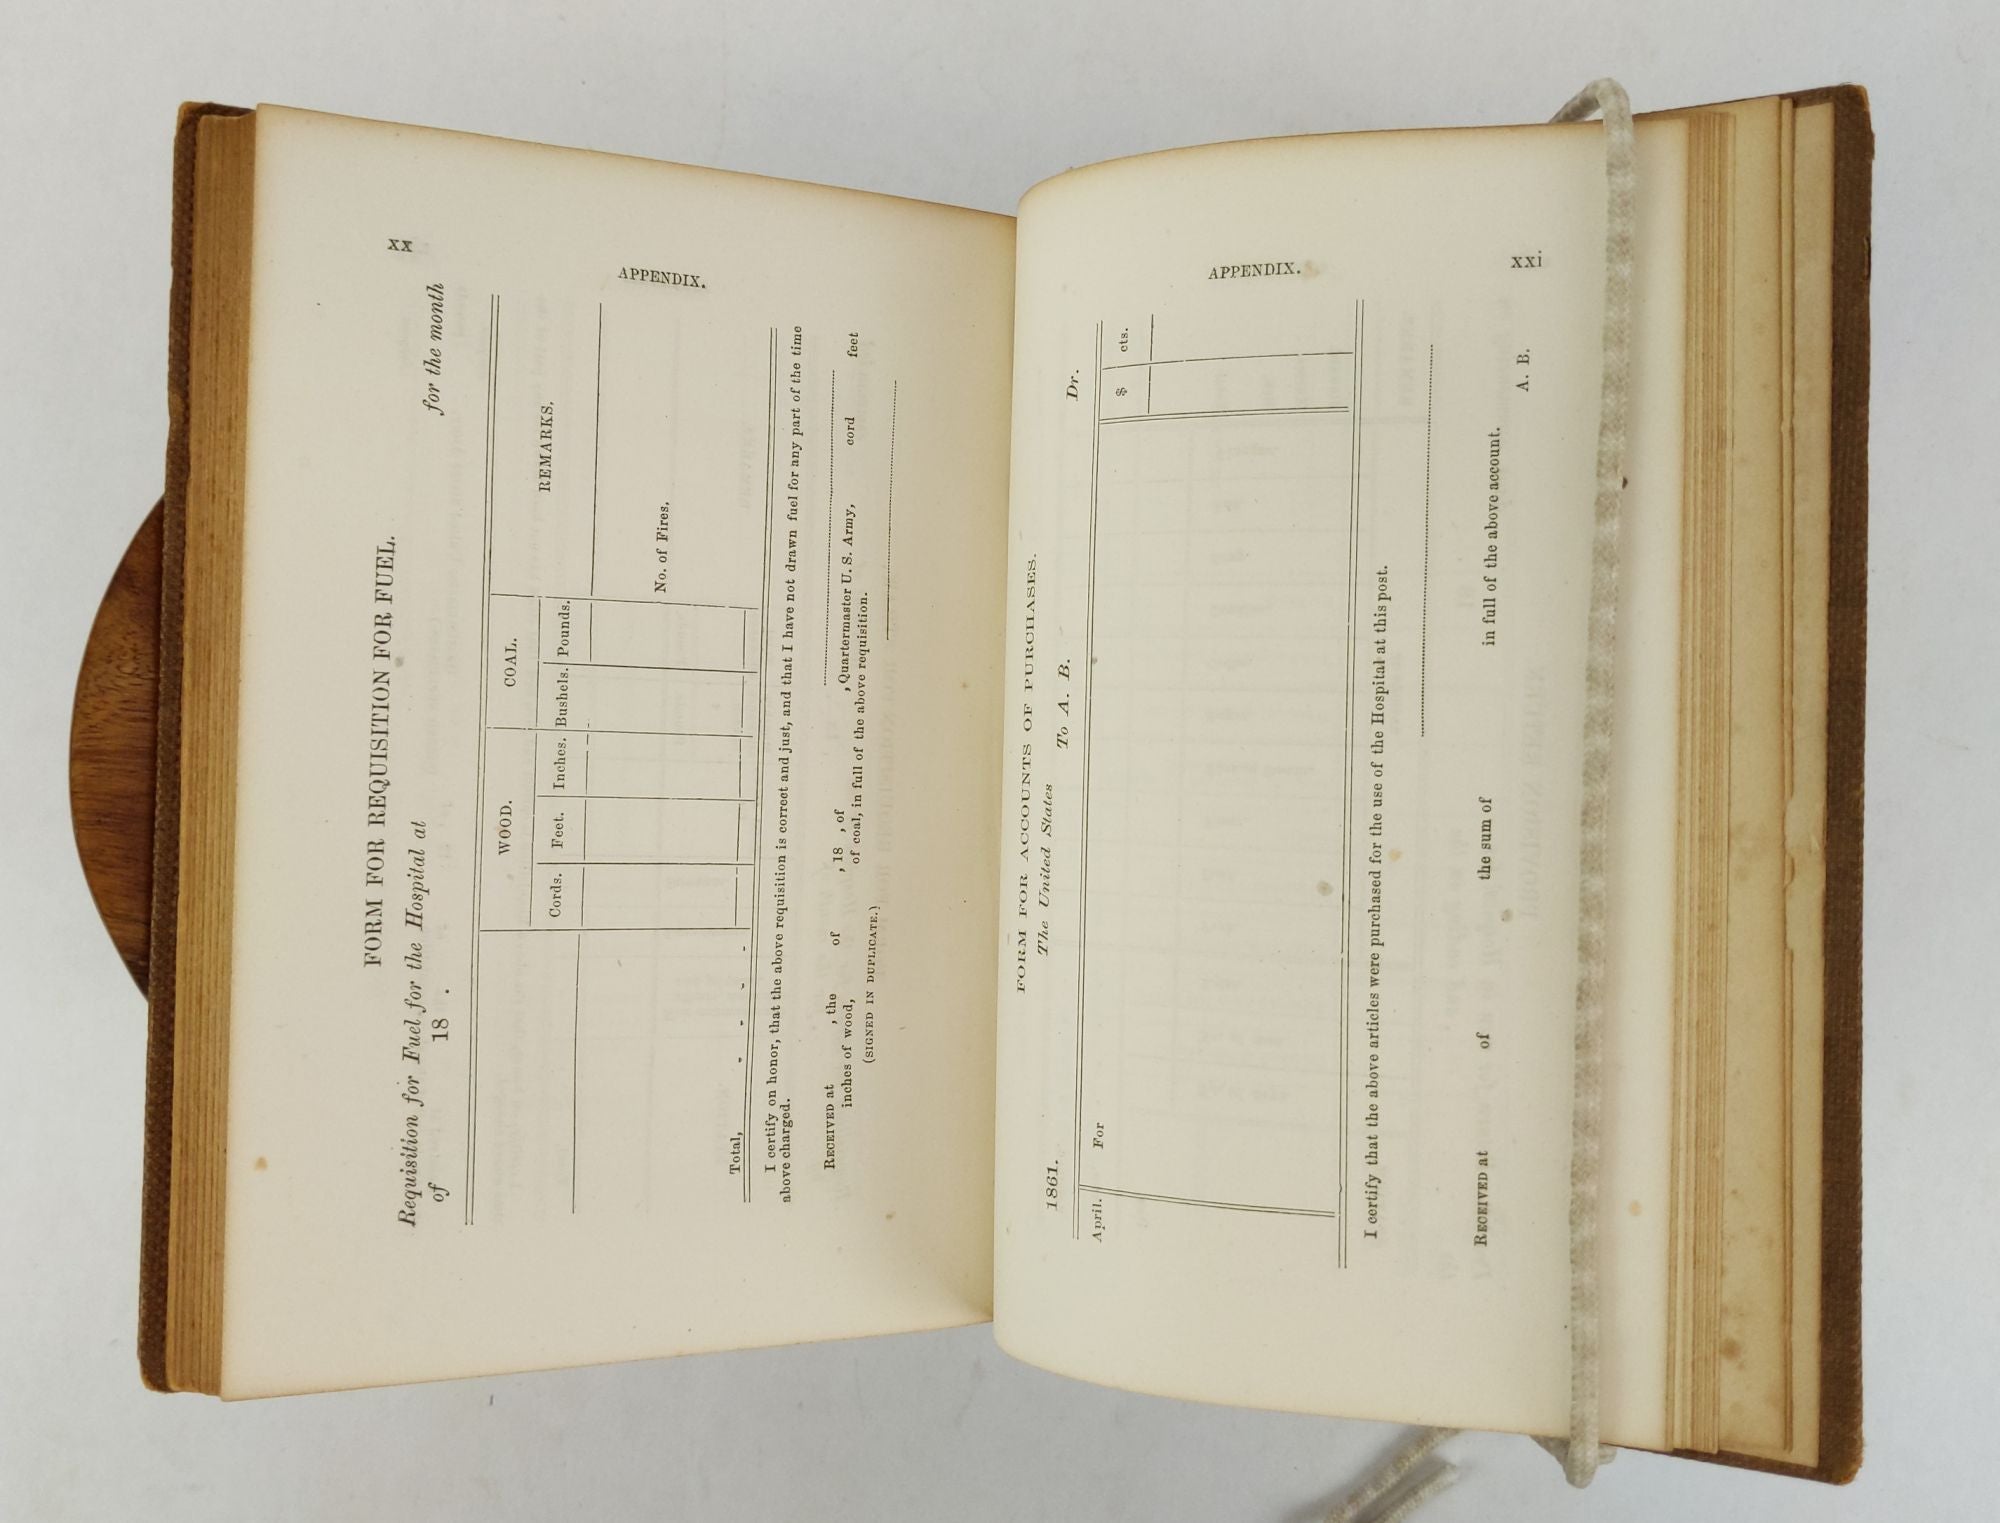 Product Image for HAND-BOOK FOR THE MILITARY SURGEON: BEING A COMPENDIUM OF THE DUTIES OF THE MEDICAL OFFICER IN THE FIELD, THE SANITARY MANAGEMENT OF THE CAMP, THE PREPARATION OF FOOD, ETC.; WITH FORMS FOR THE REQUISITIONS FOR SUPPLIES, RETURNS, ETC.; THE DIAGNOSIS AND TR